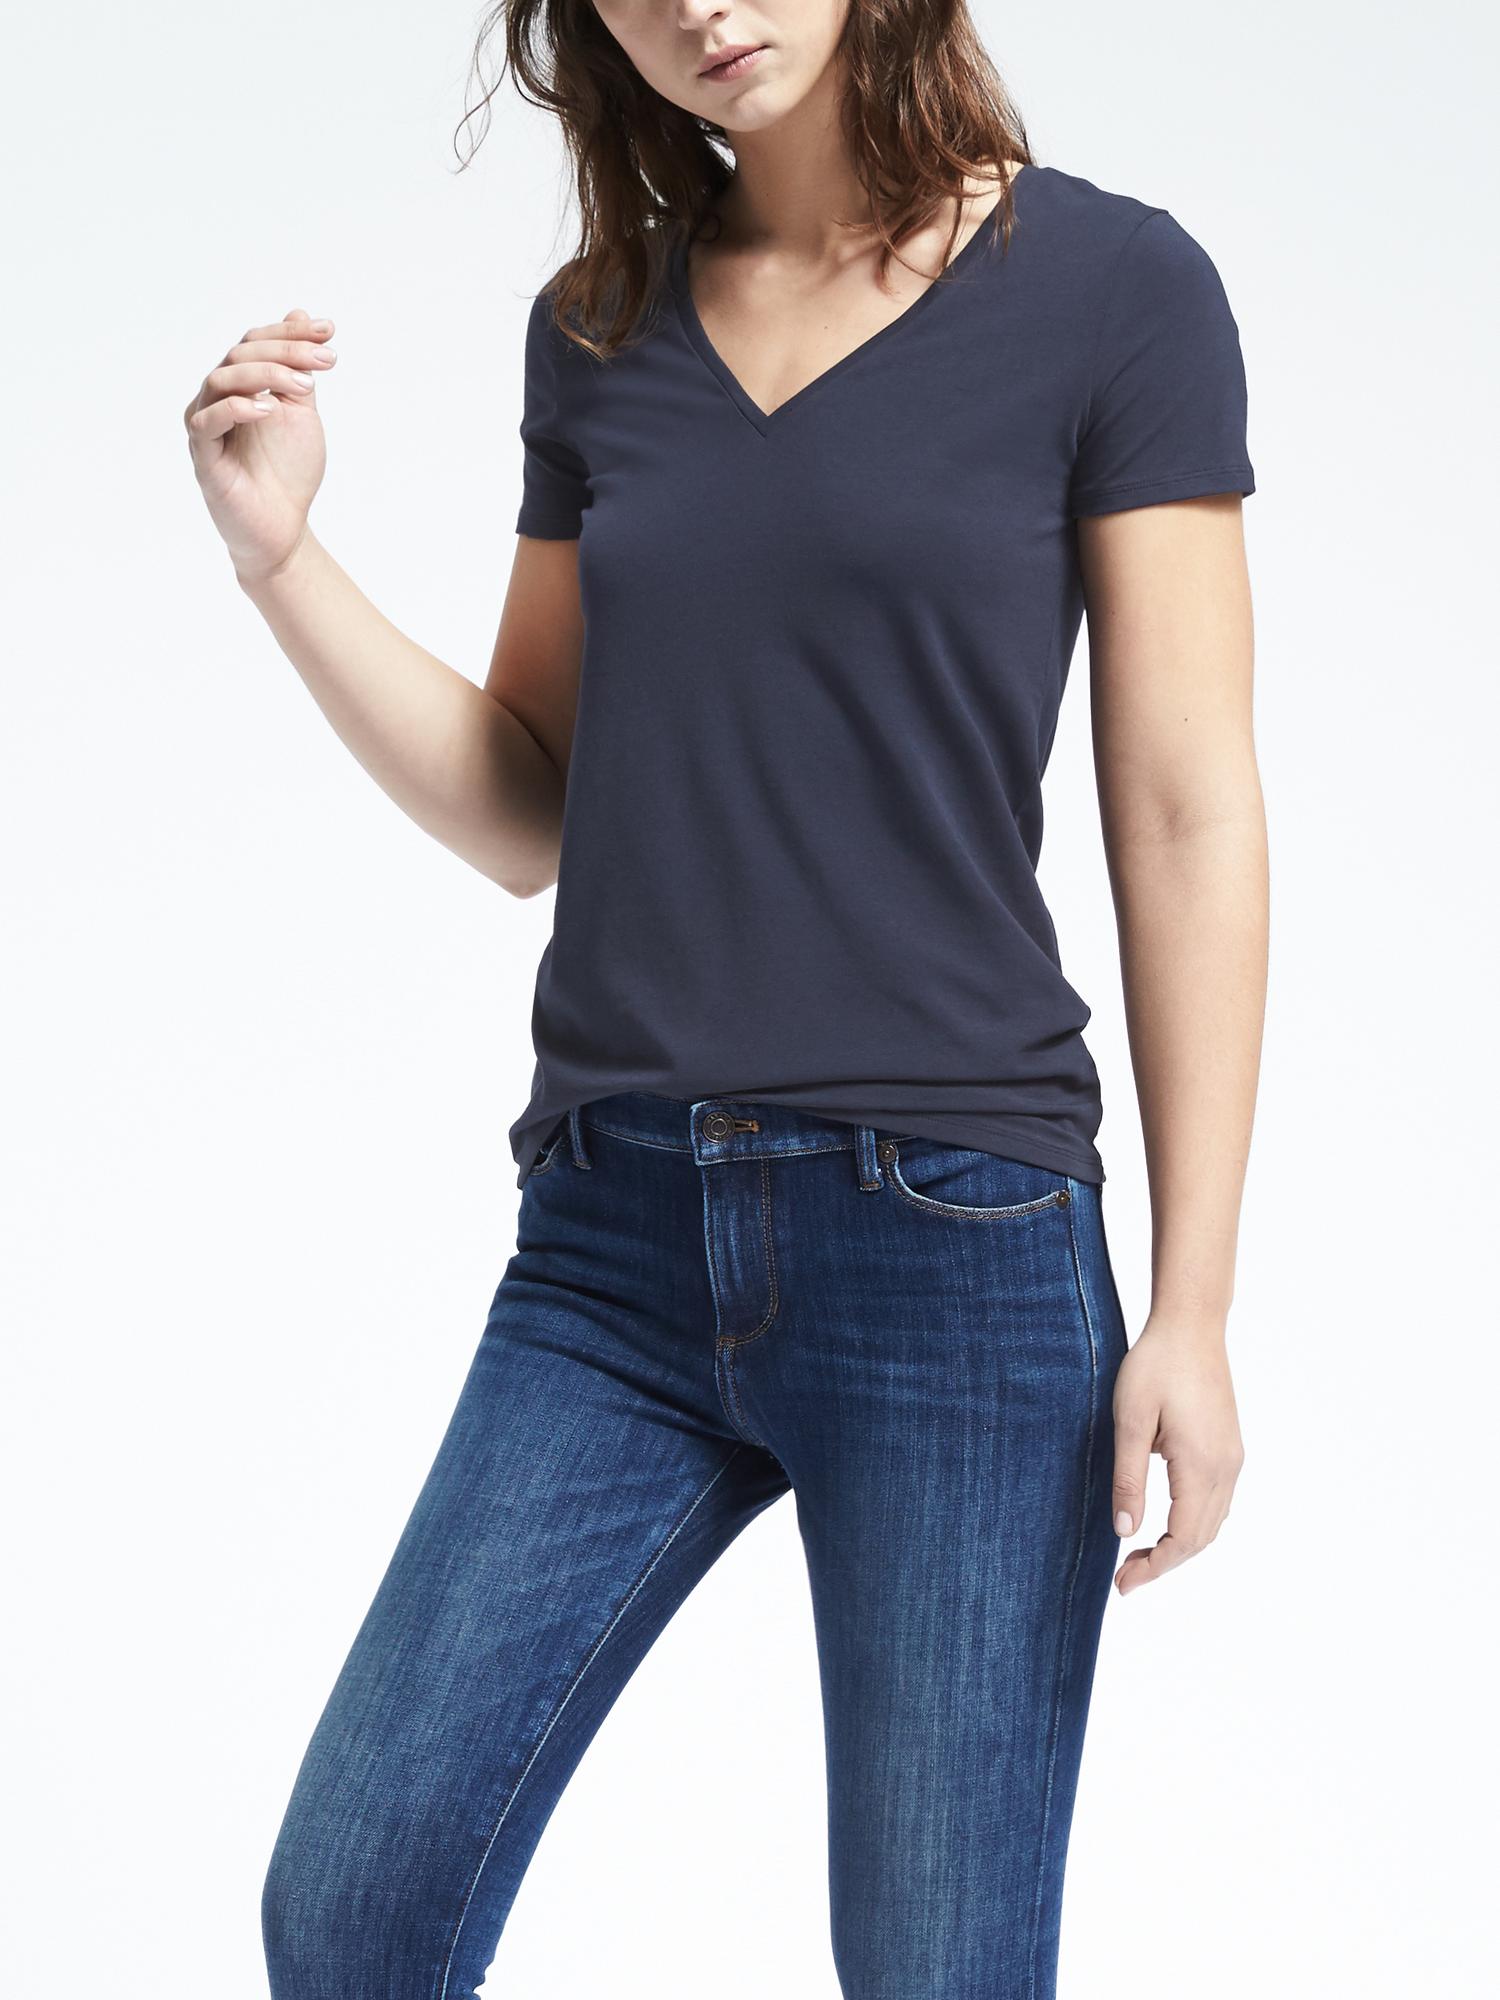 Short-Sleeve Stretch-to-Fit Vee Tee